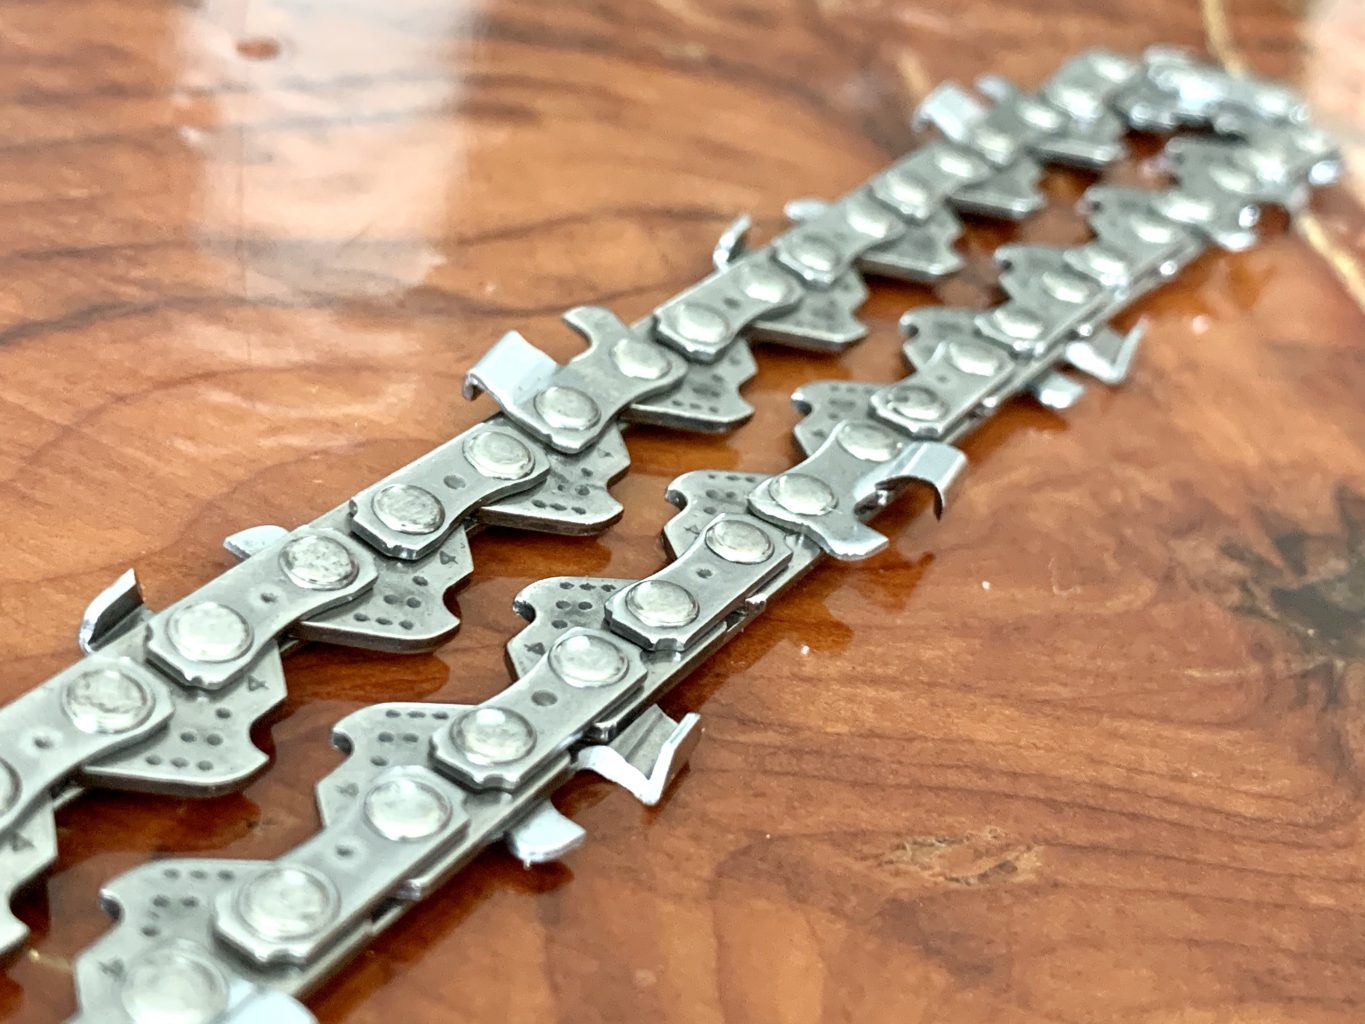 PMC Panther Mini Chain 1/4 .043 100 Drive Link Chain for 20"[50cm] Panther Mini Bars